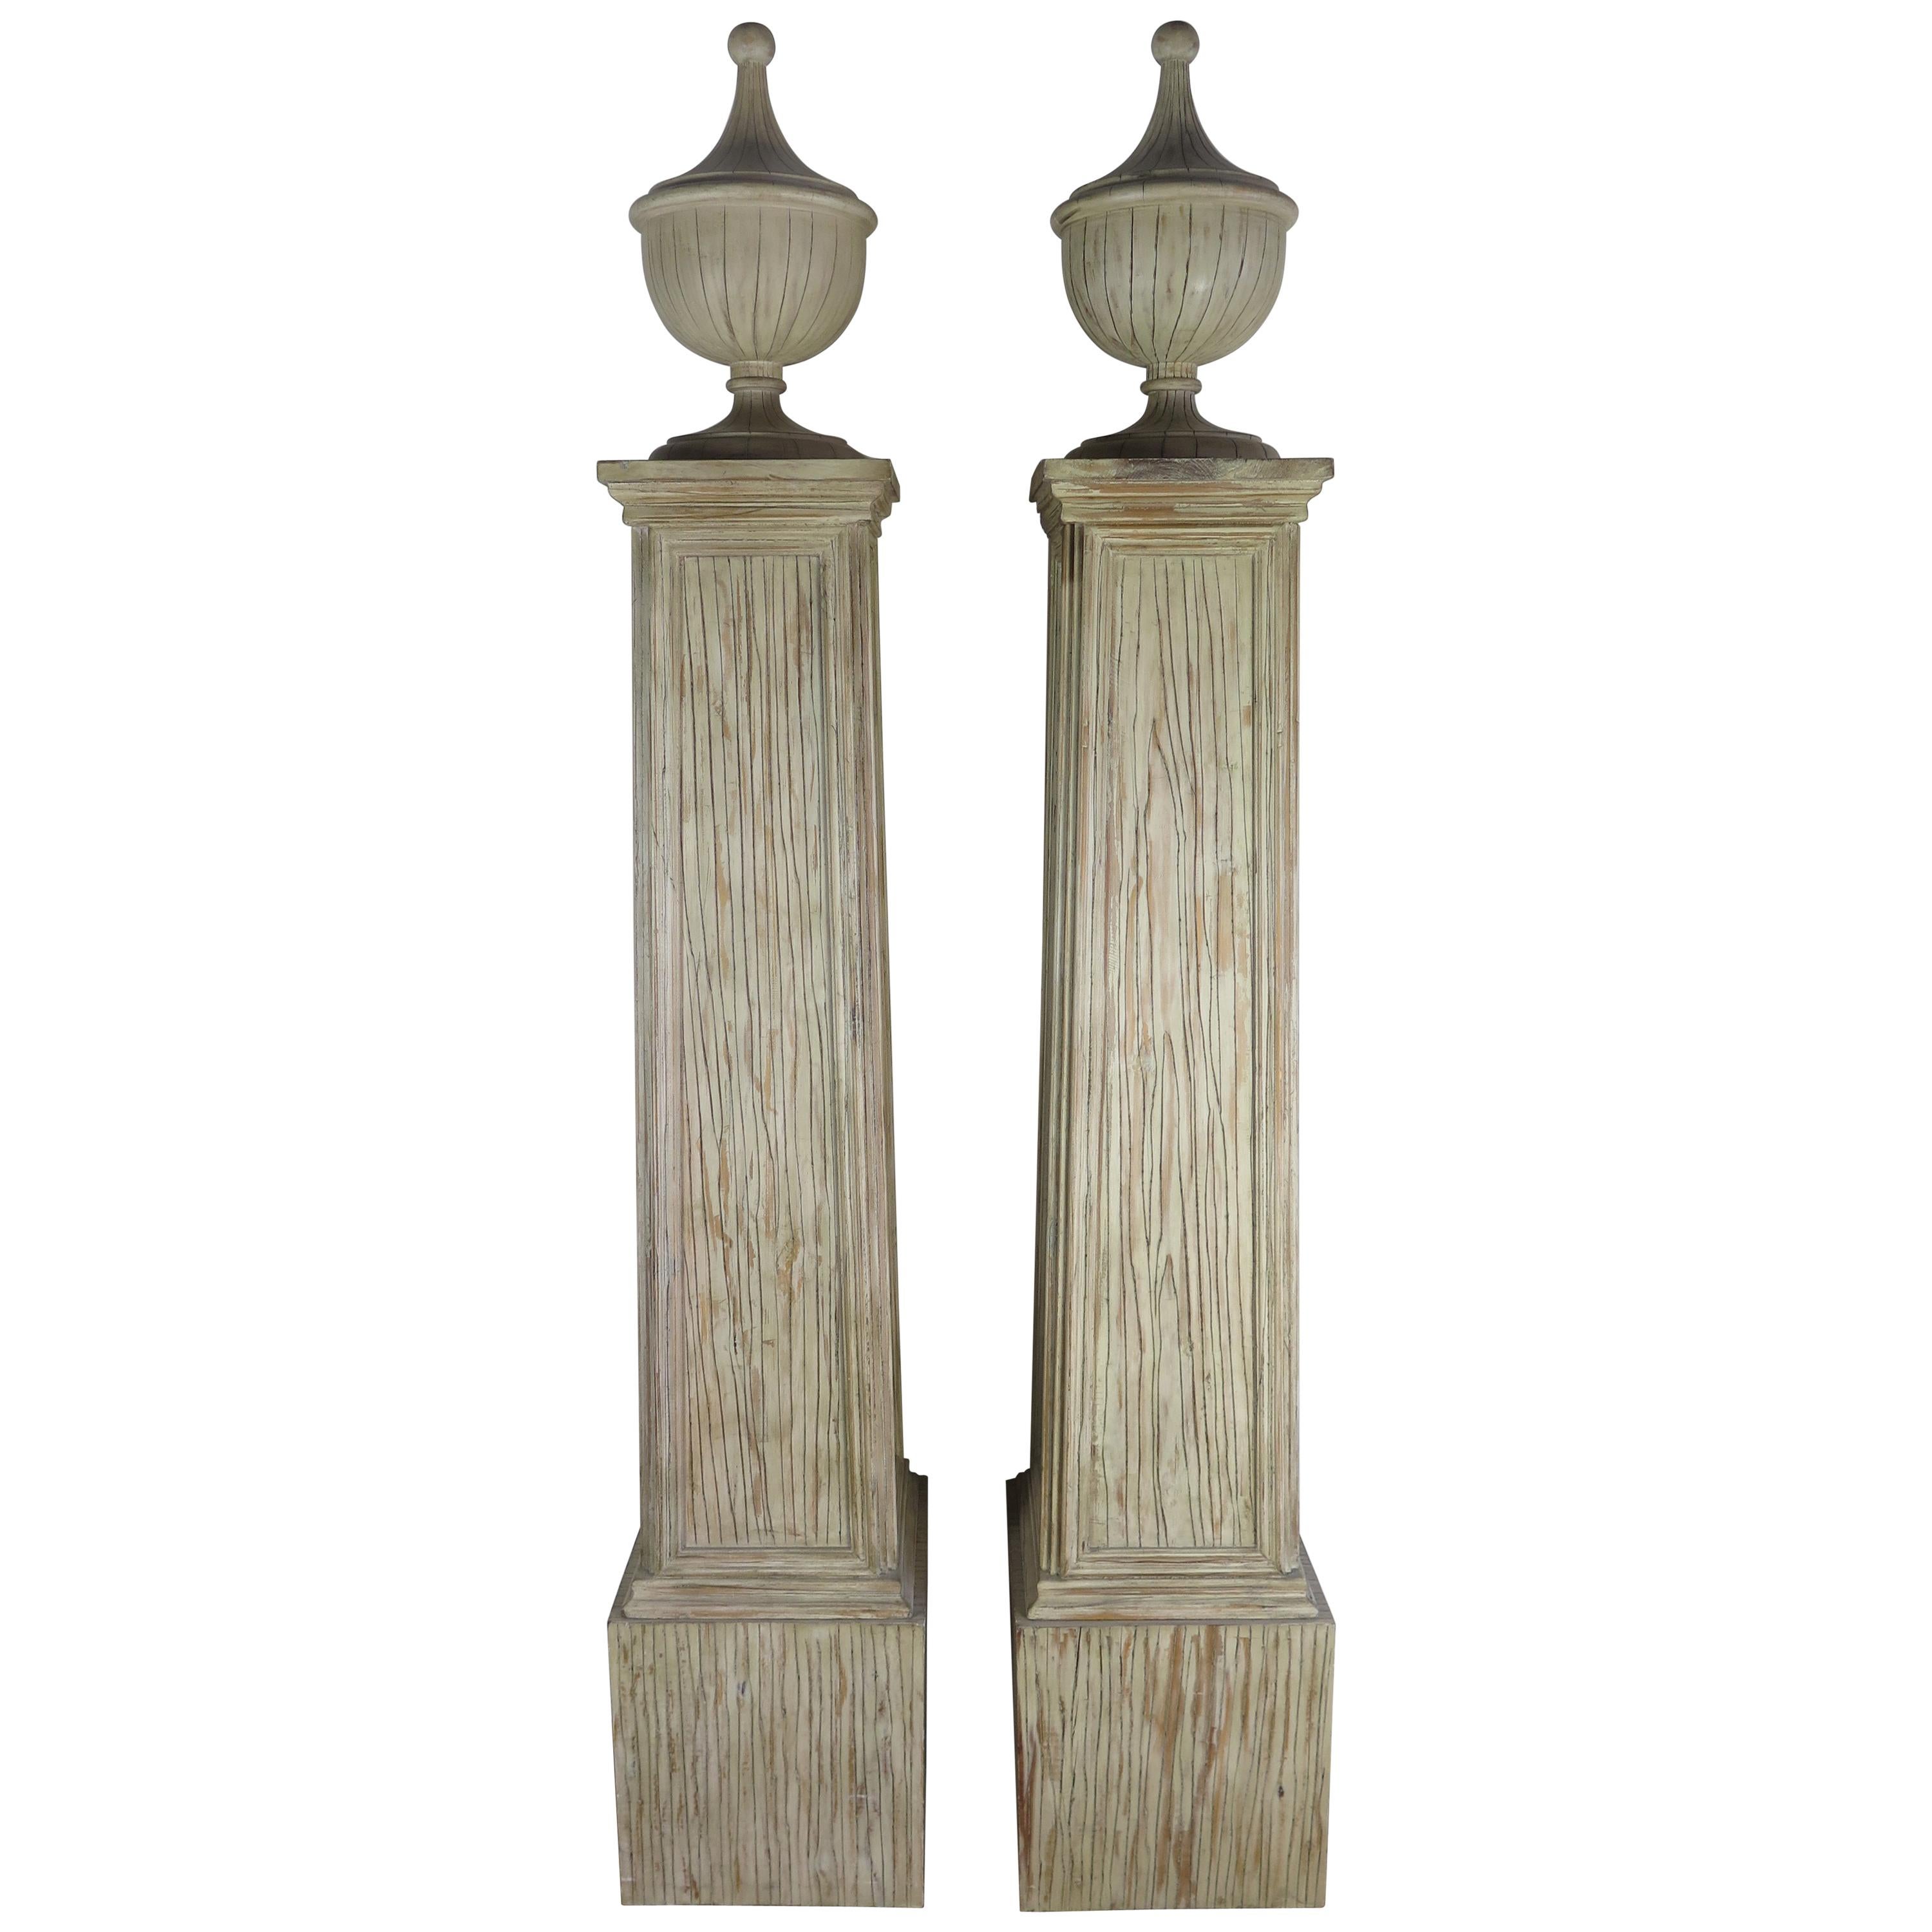 Pair of Architectural Elements